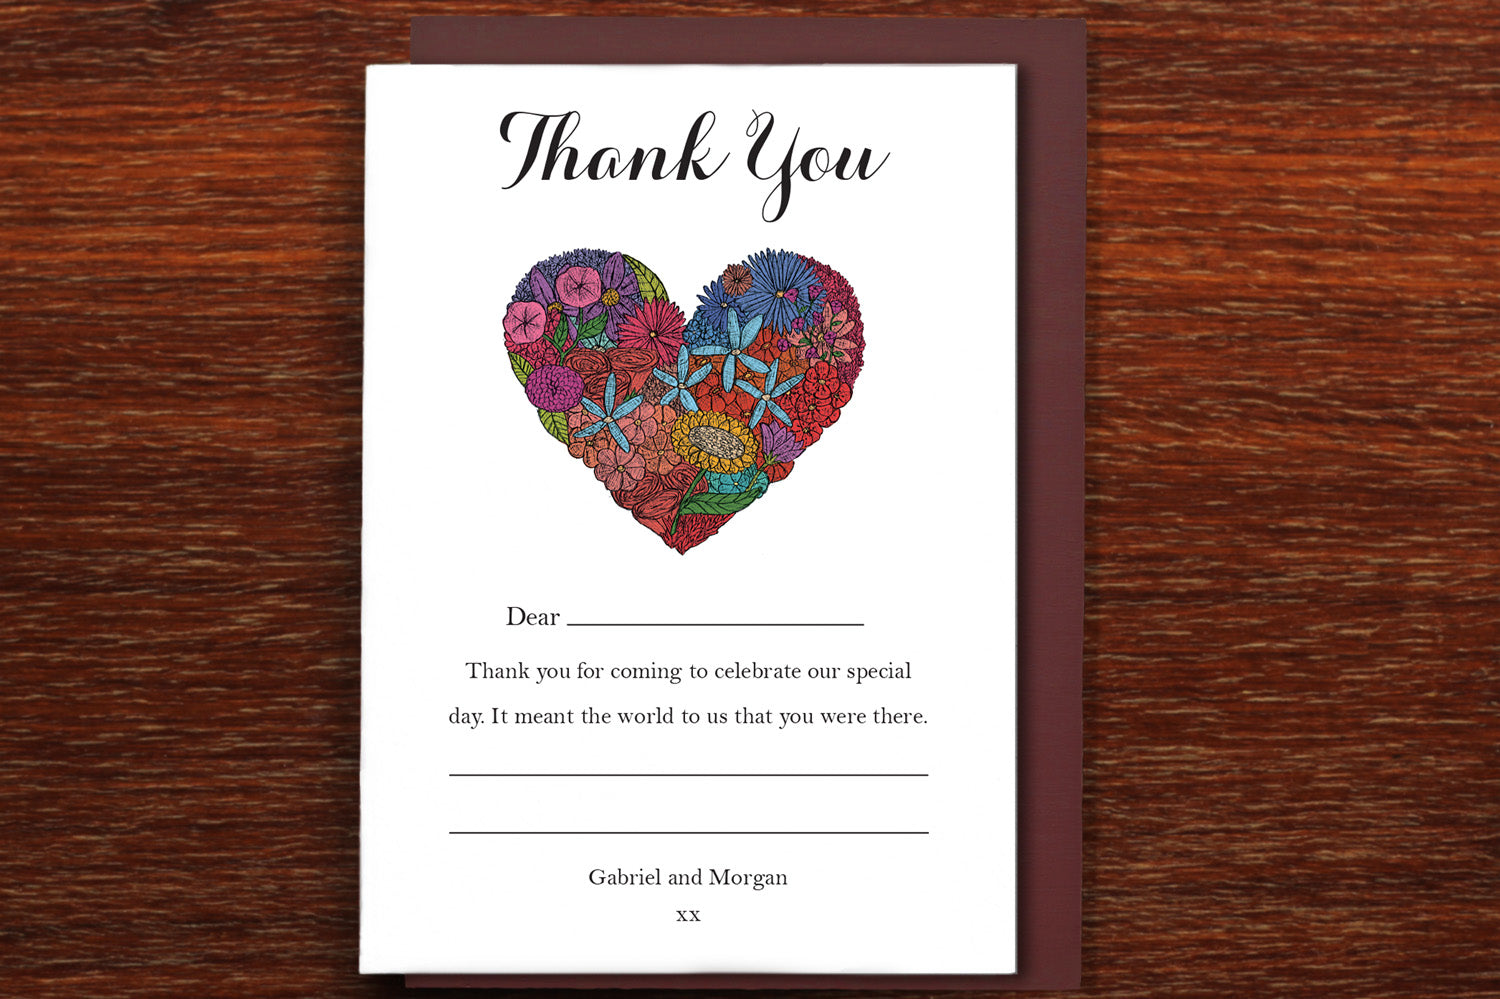 Heart of Flowers - Wedding Thank you